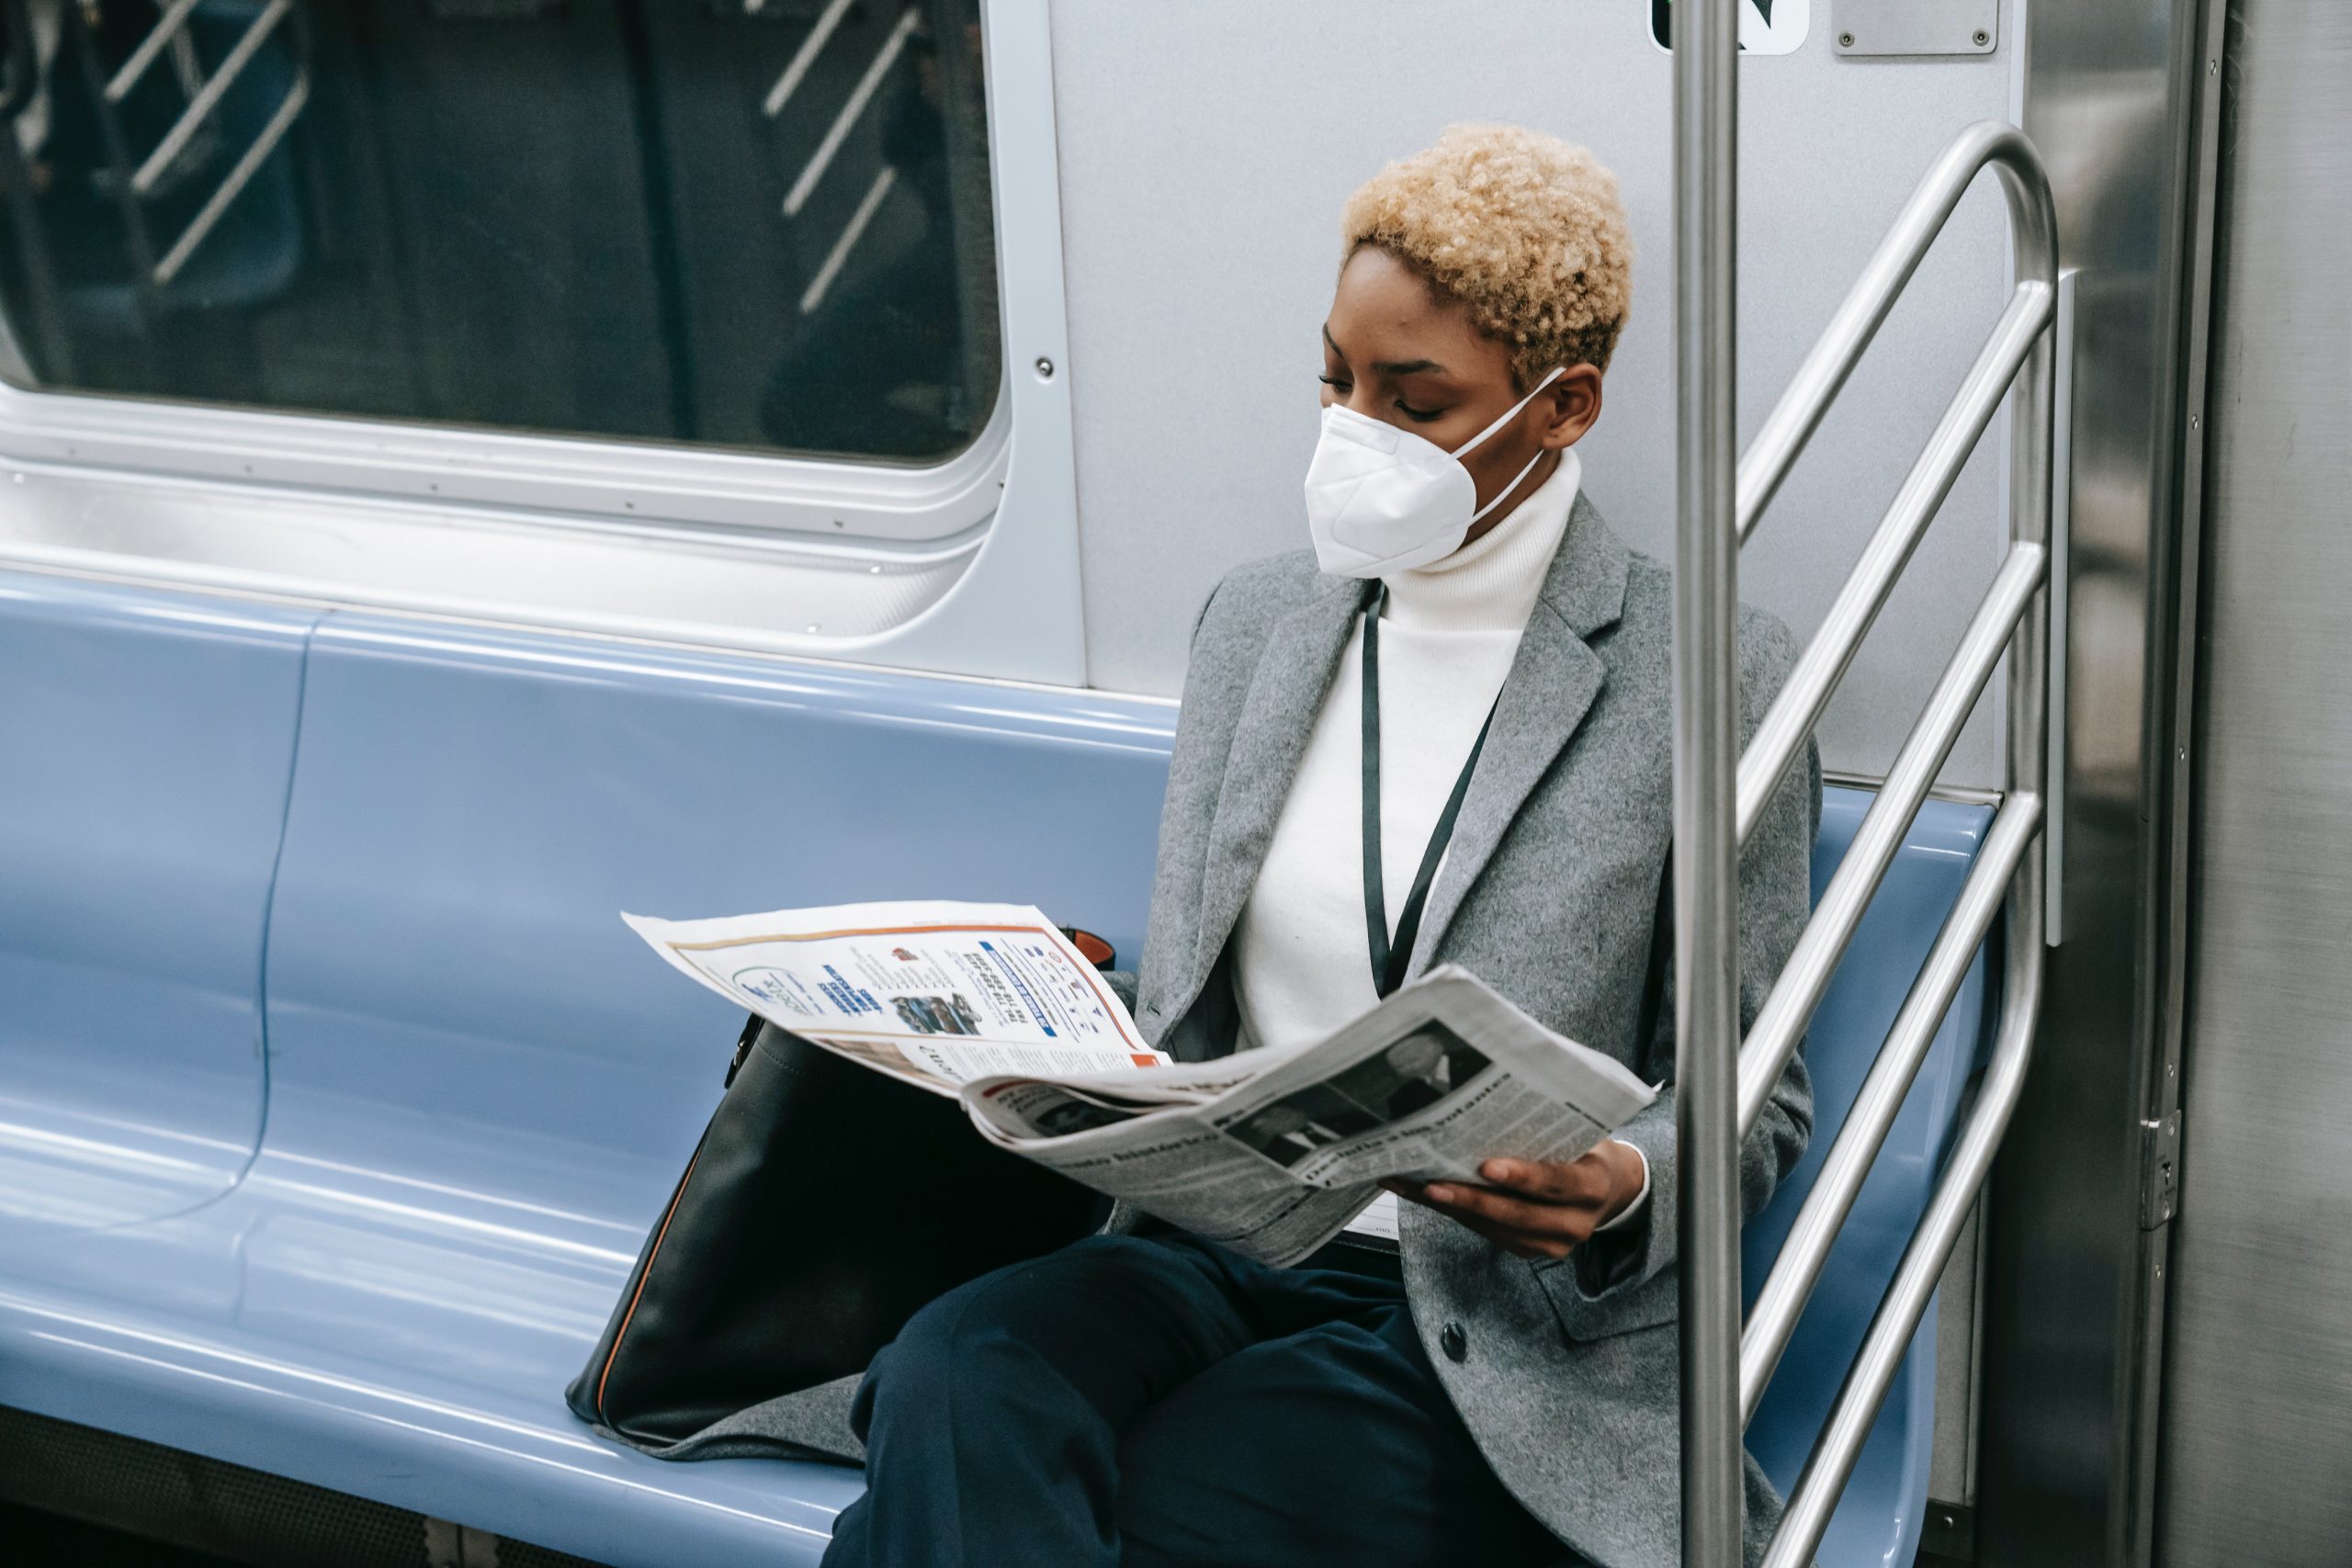 Woman in subway wearing a mask.